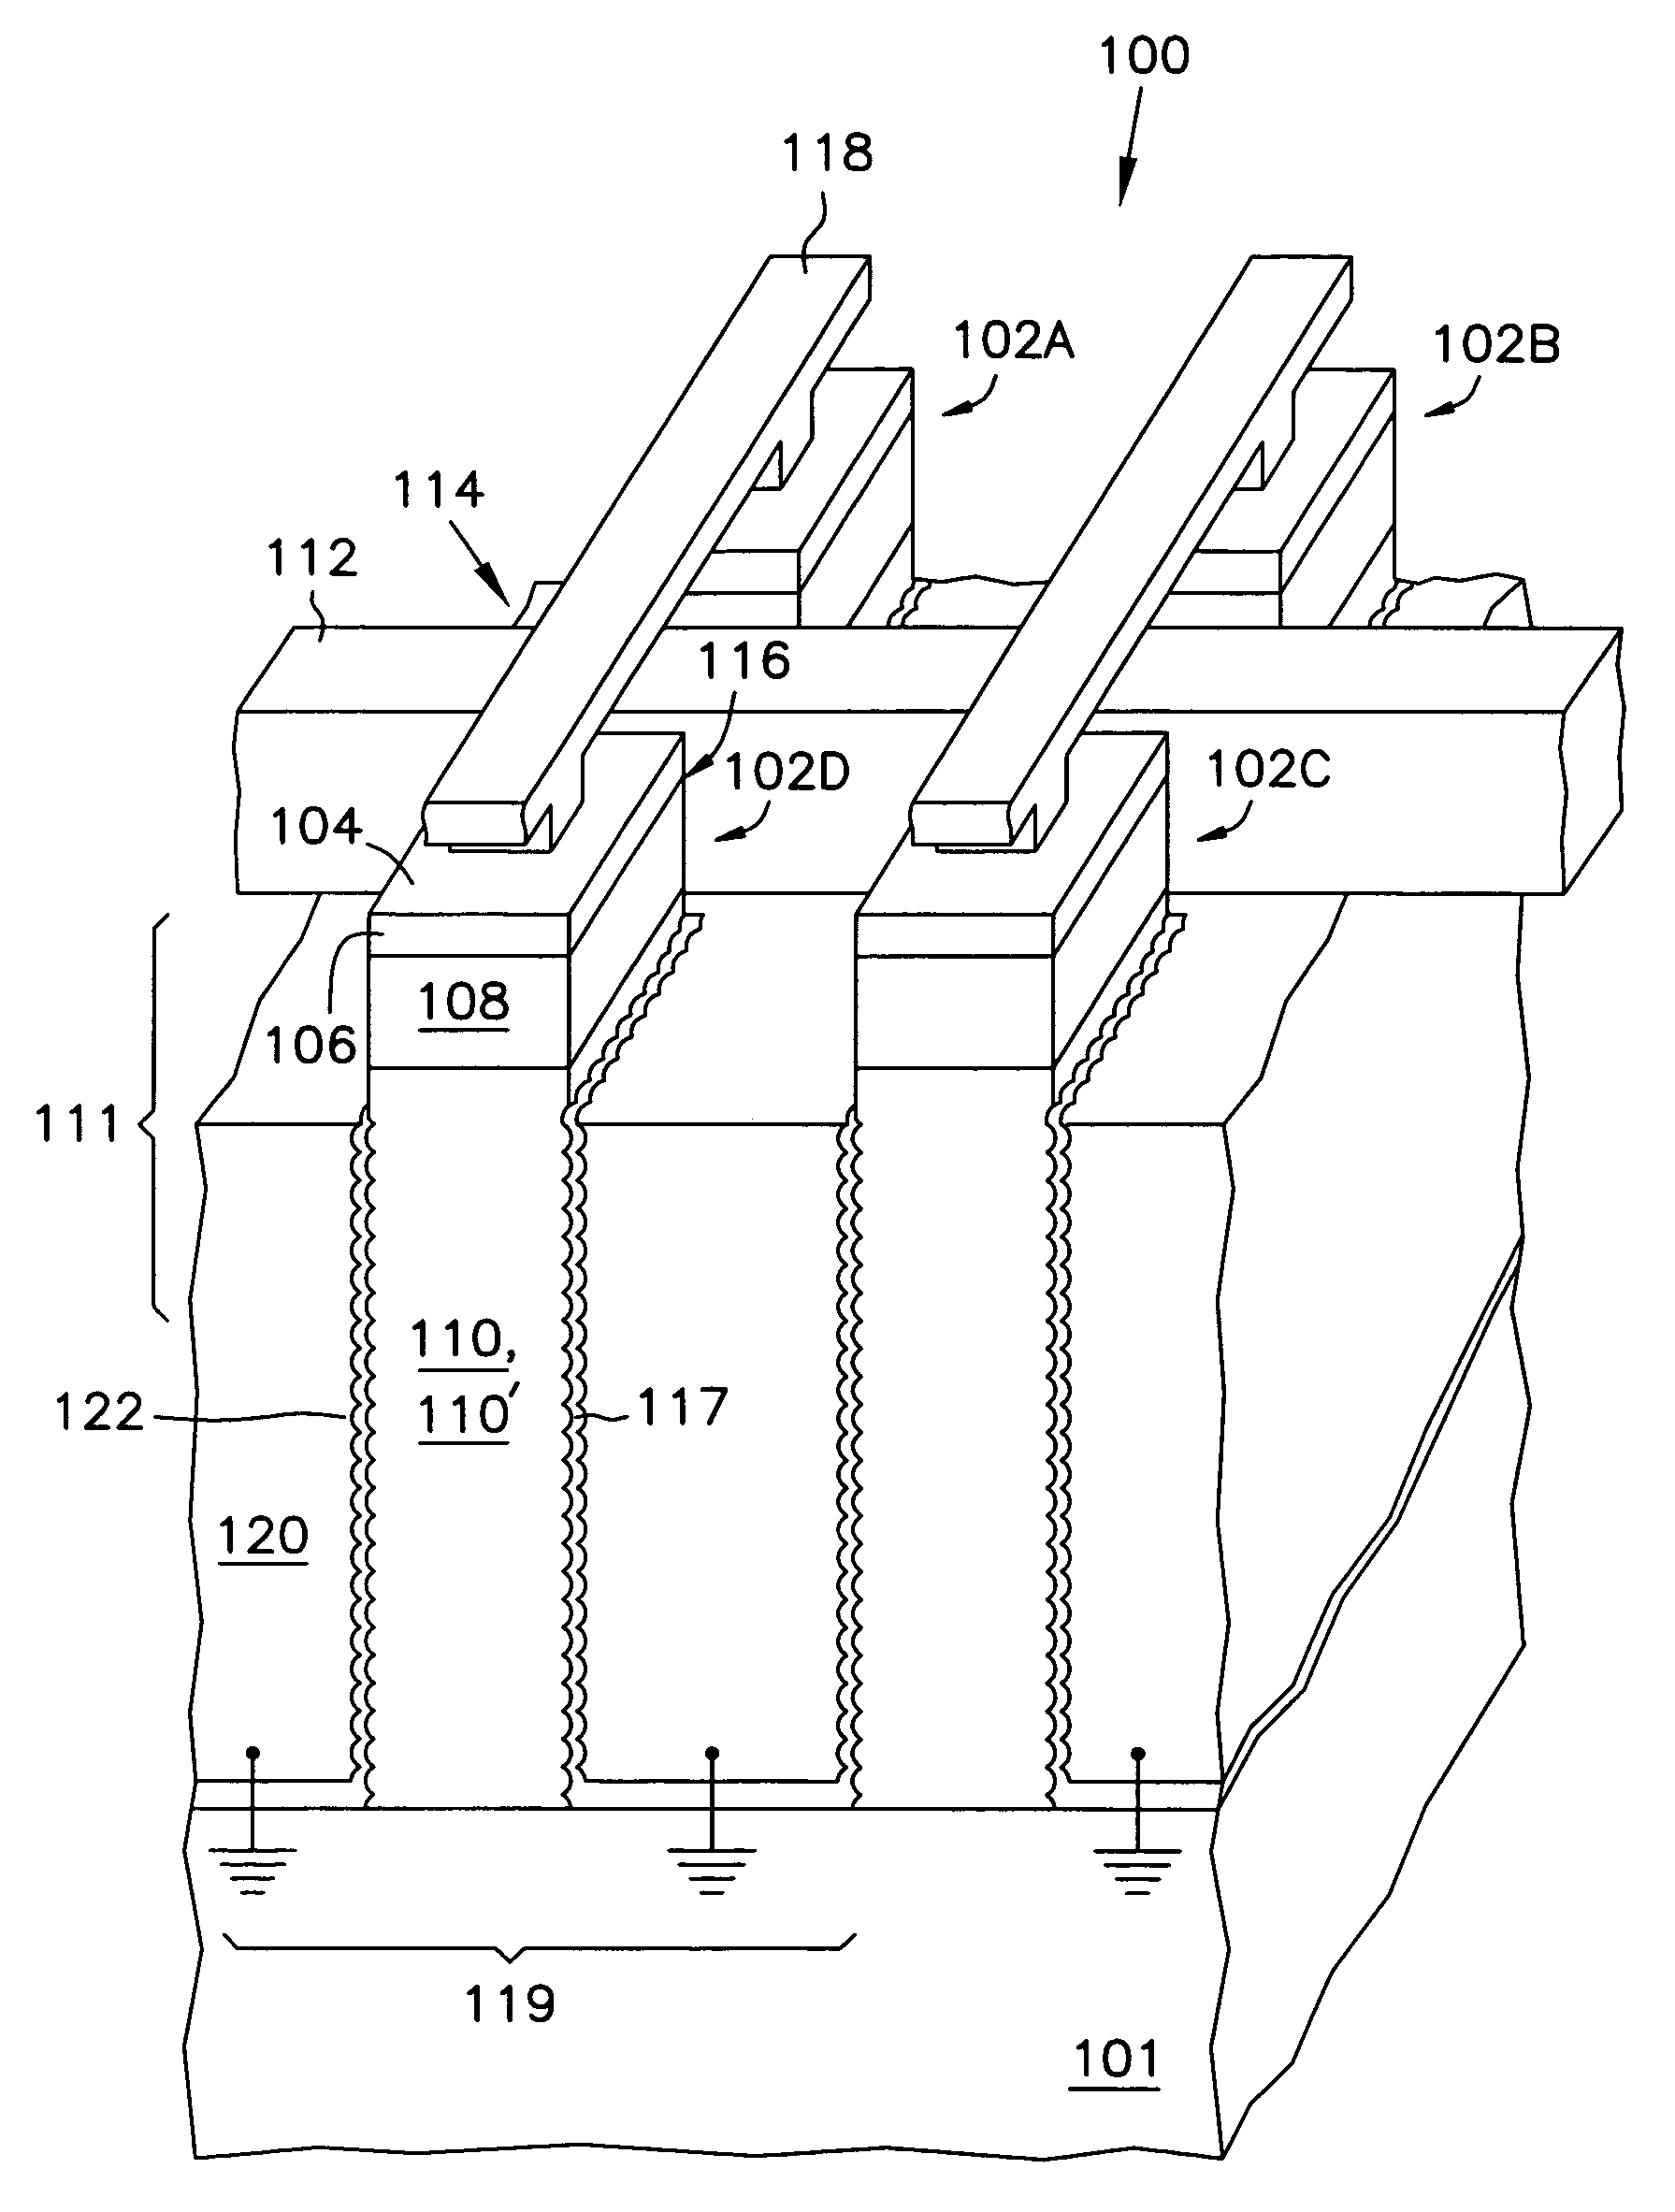 Circuits with a trench capacitor having micro-roughened semiconductor surfaces